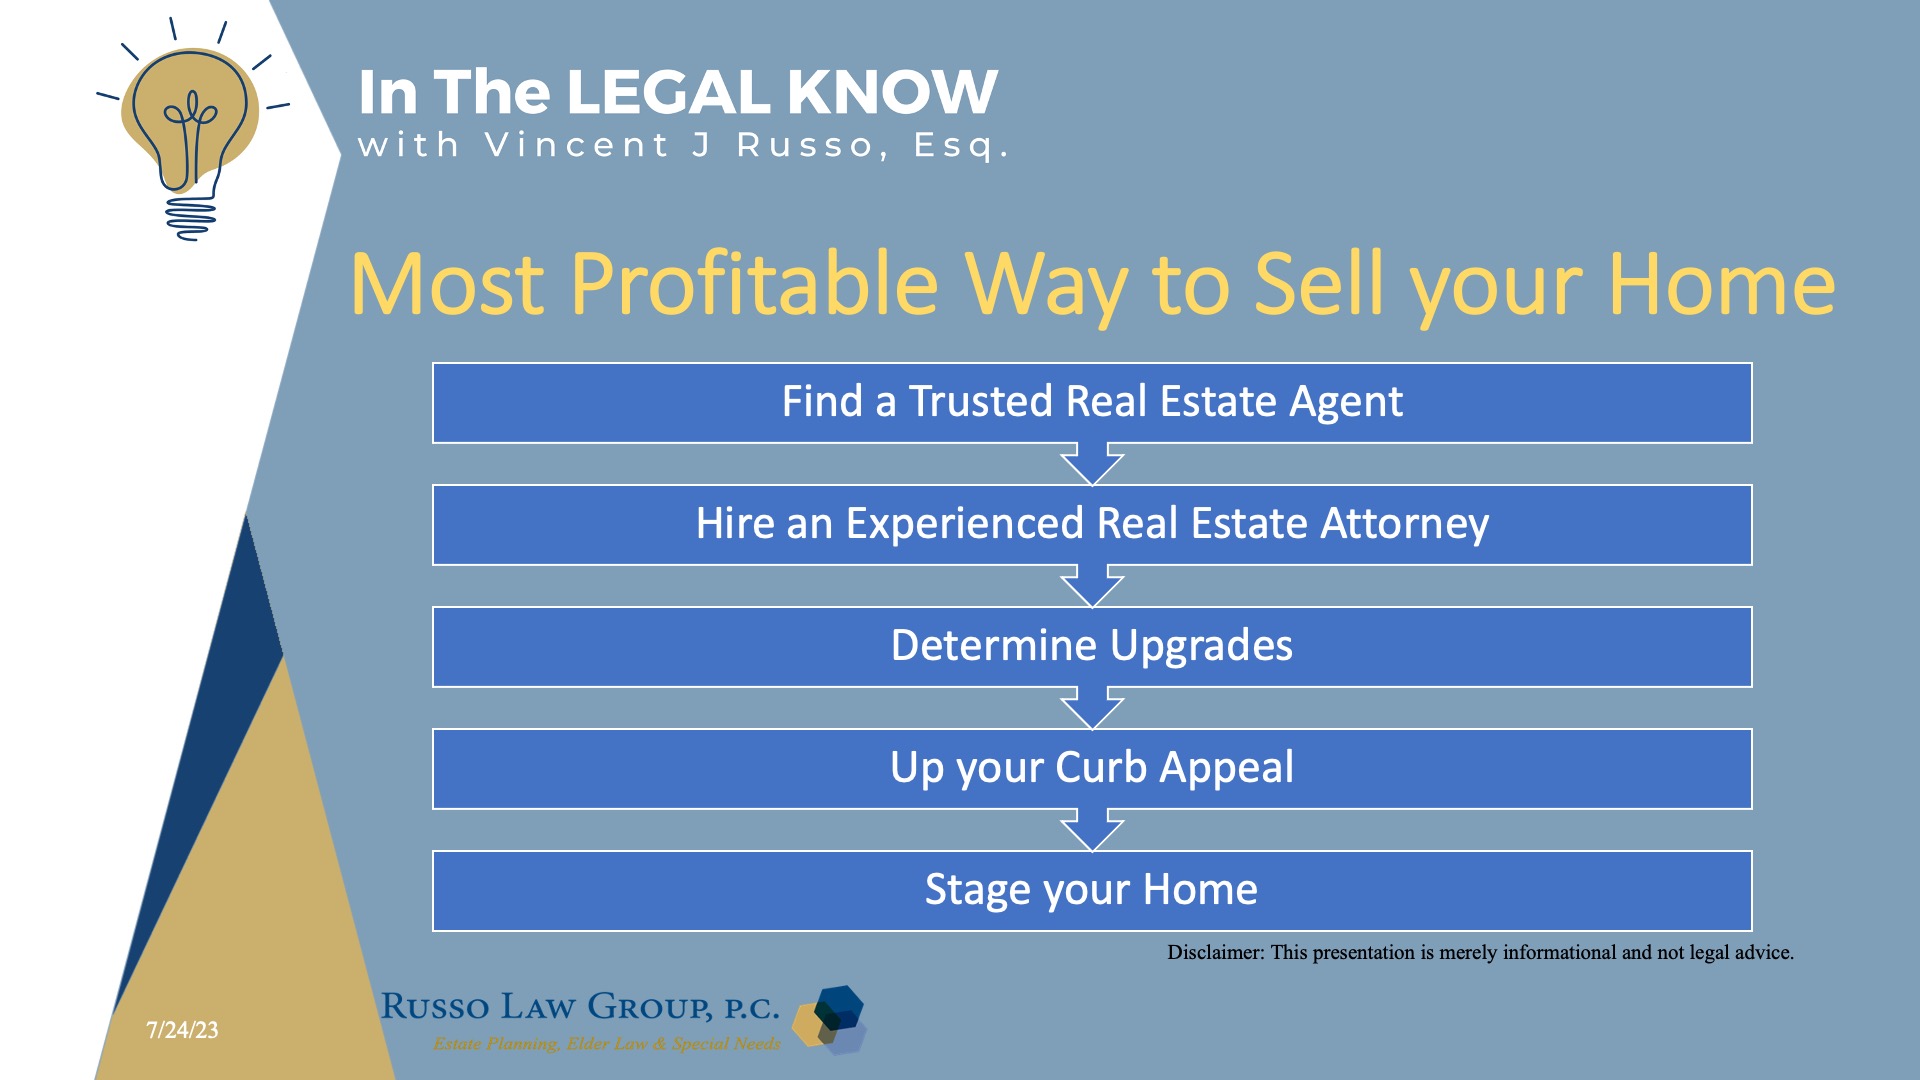 Most Profitable Way to Sell Your Home